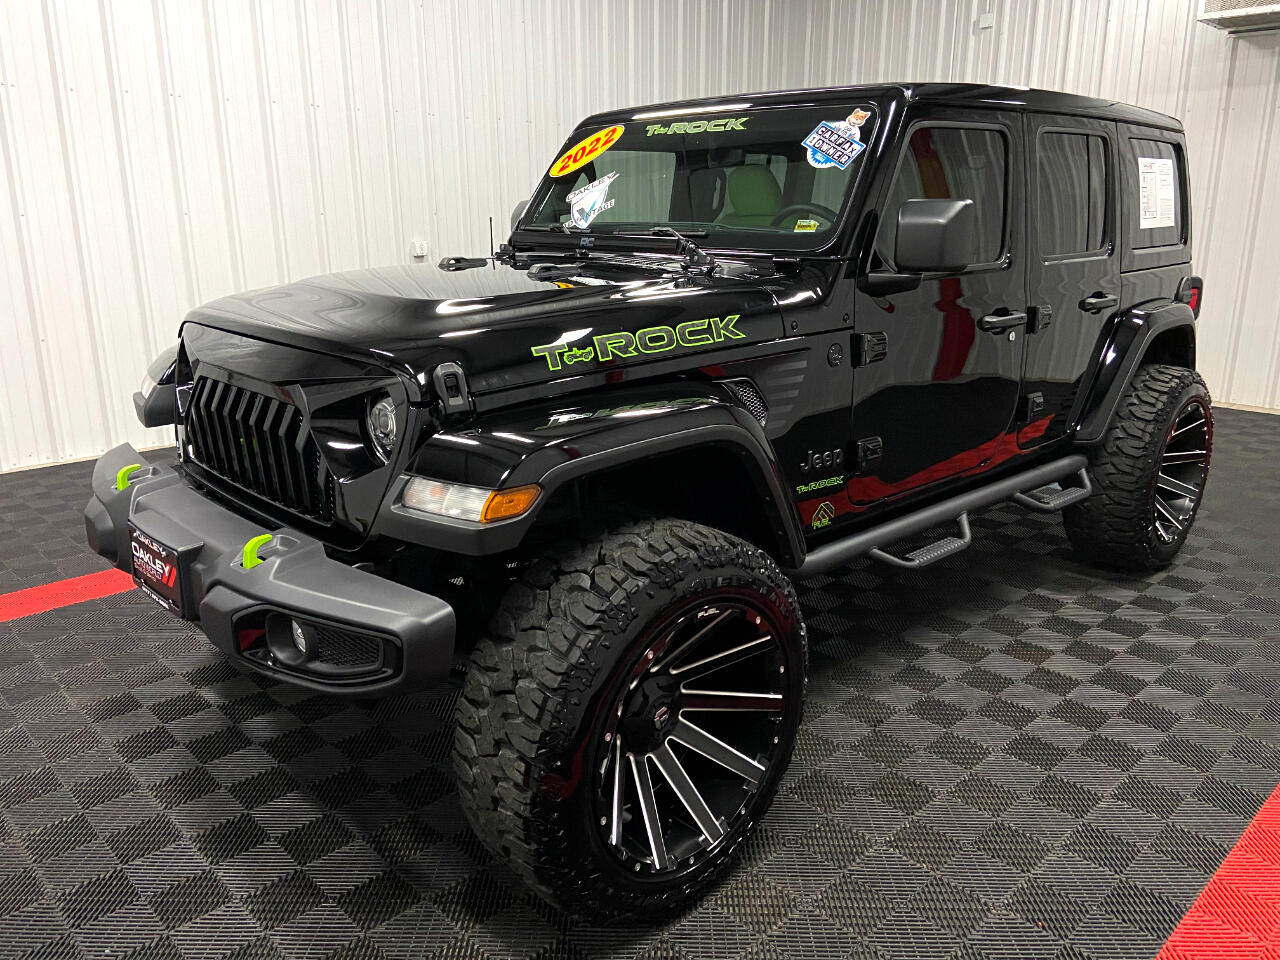 Used 2022 Jeep Wrangler T-ROCK 1 Touch Sky Power Top Unlimited Lifted 4x4  for Sale in Branson West MO 65737 Oakley Auto World